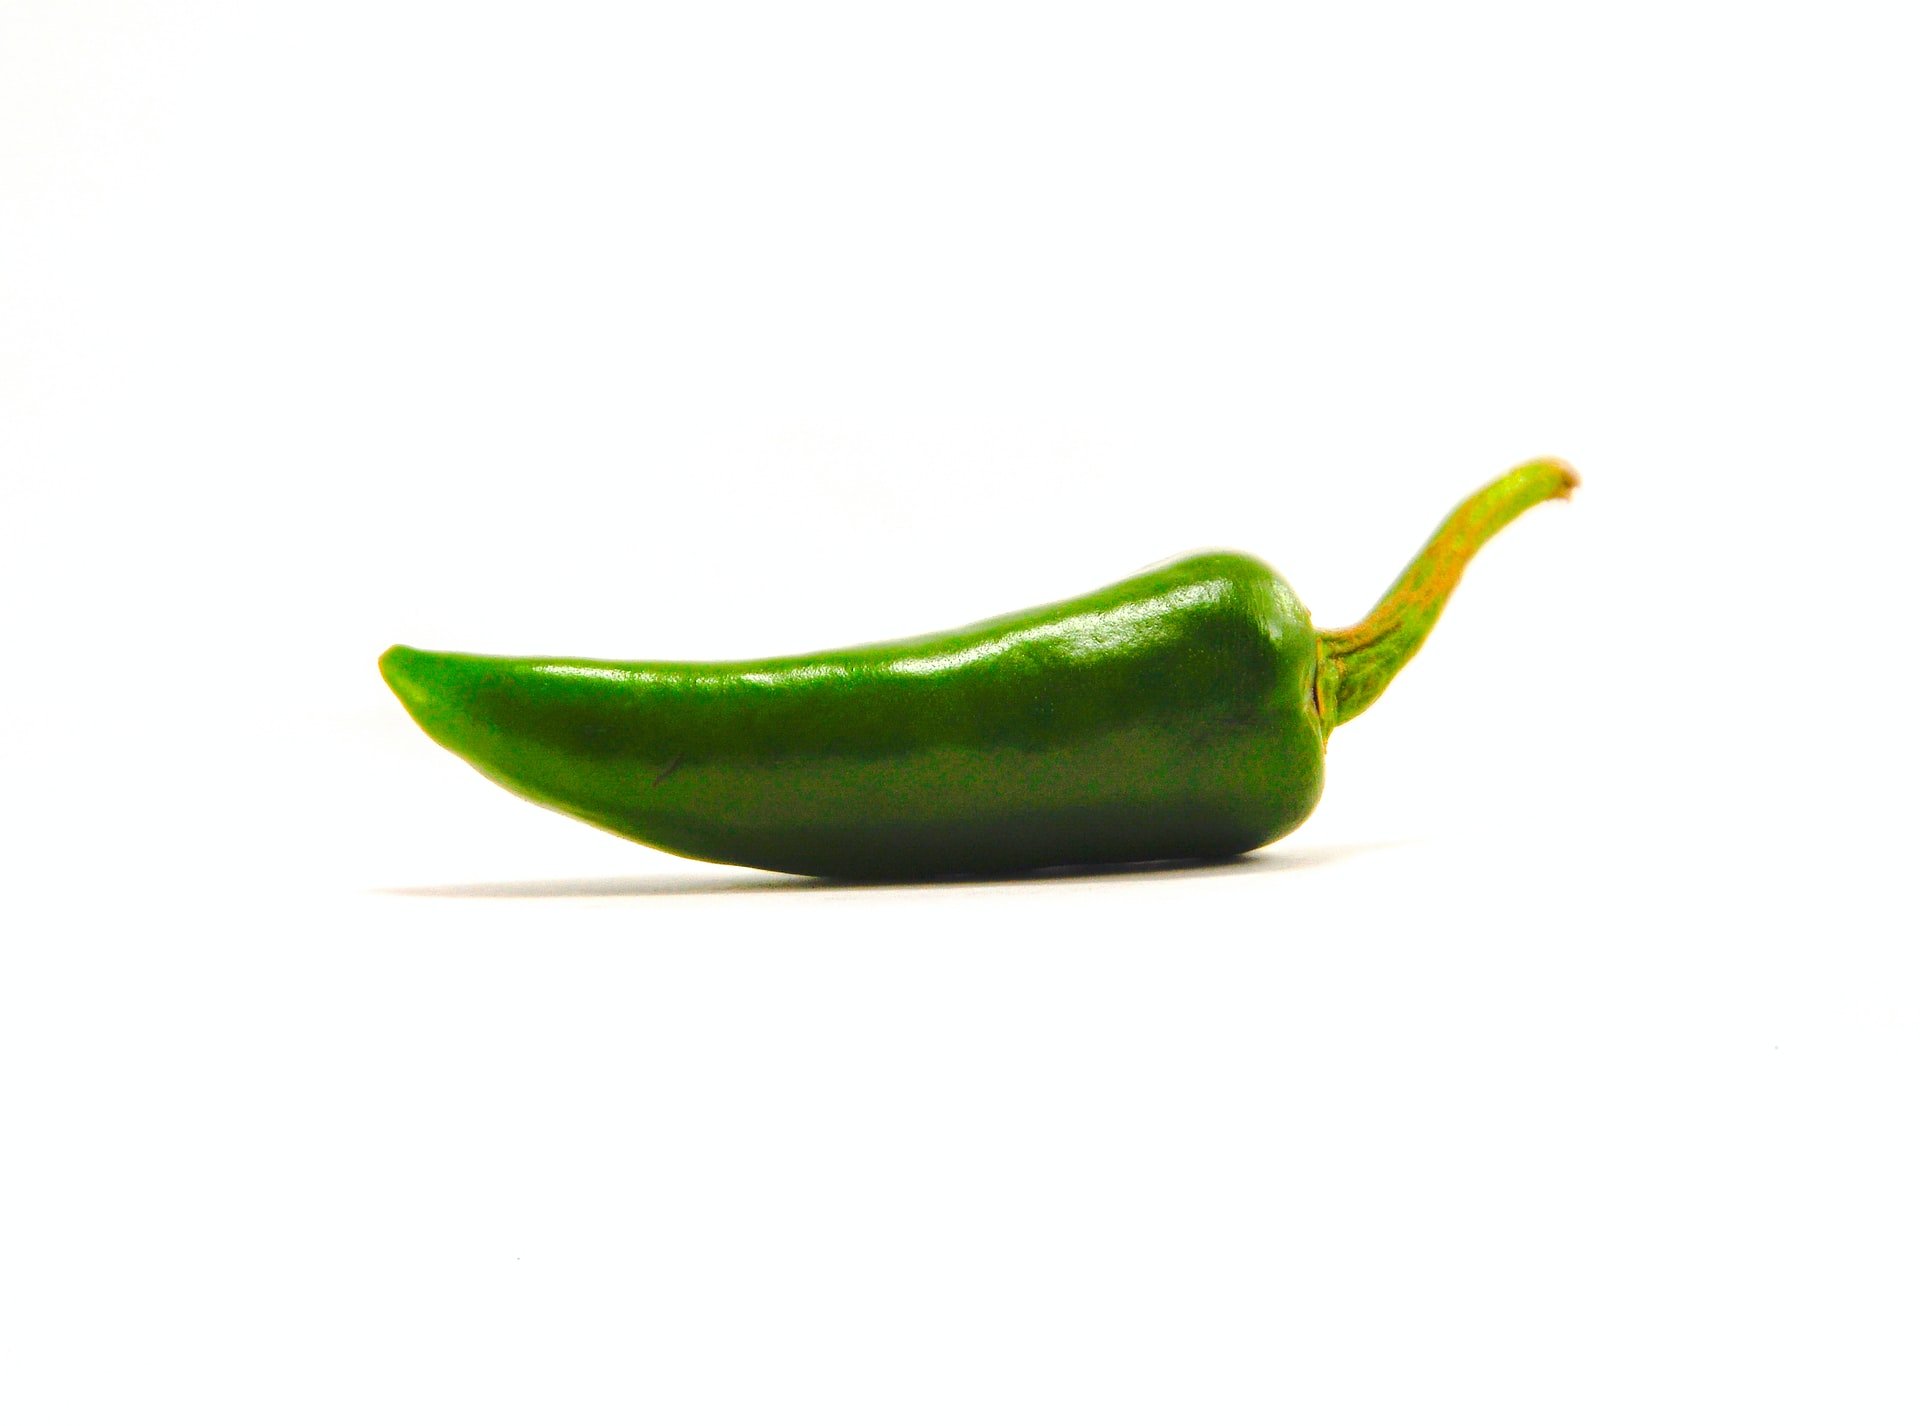 A picture of a green jalapeno chili on a white background